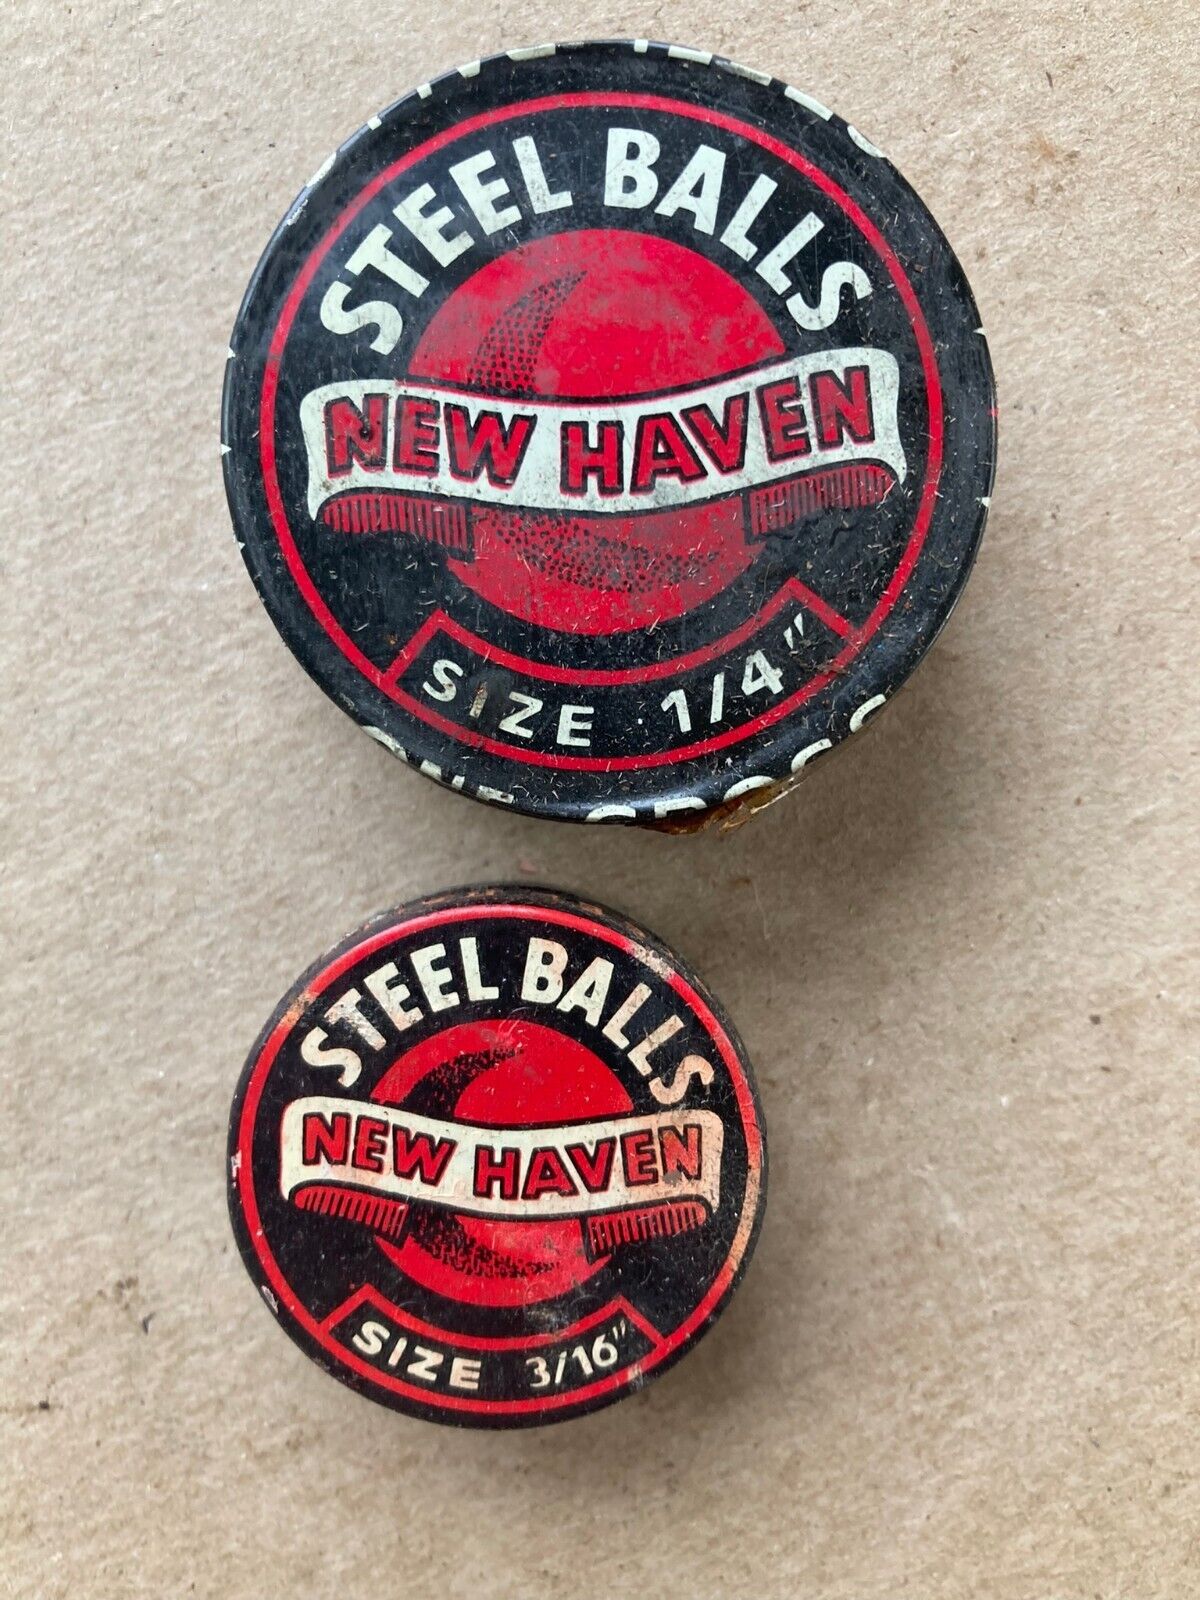 NOS Vintage New Haven bicycle bearings, 2 sizes for front & rear hubs, cranks